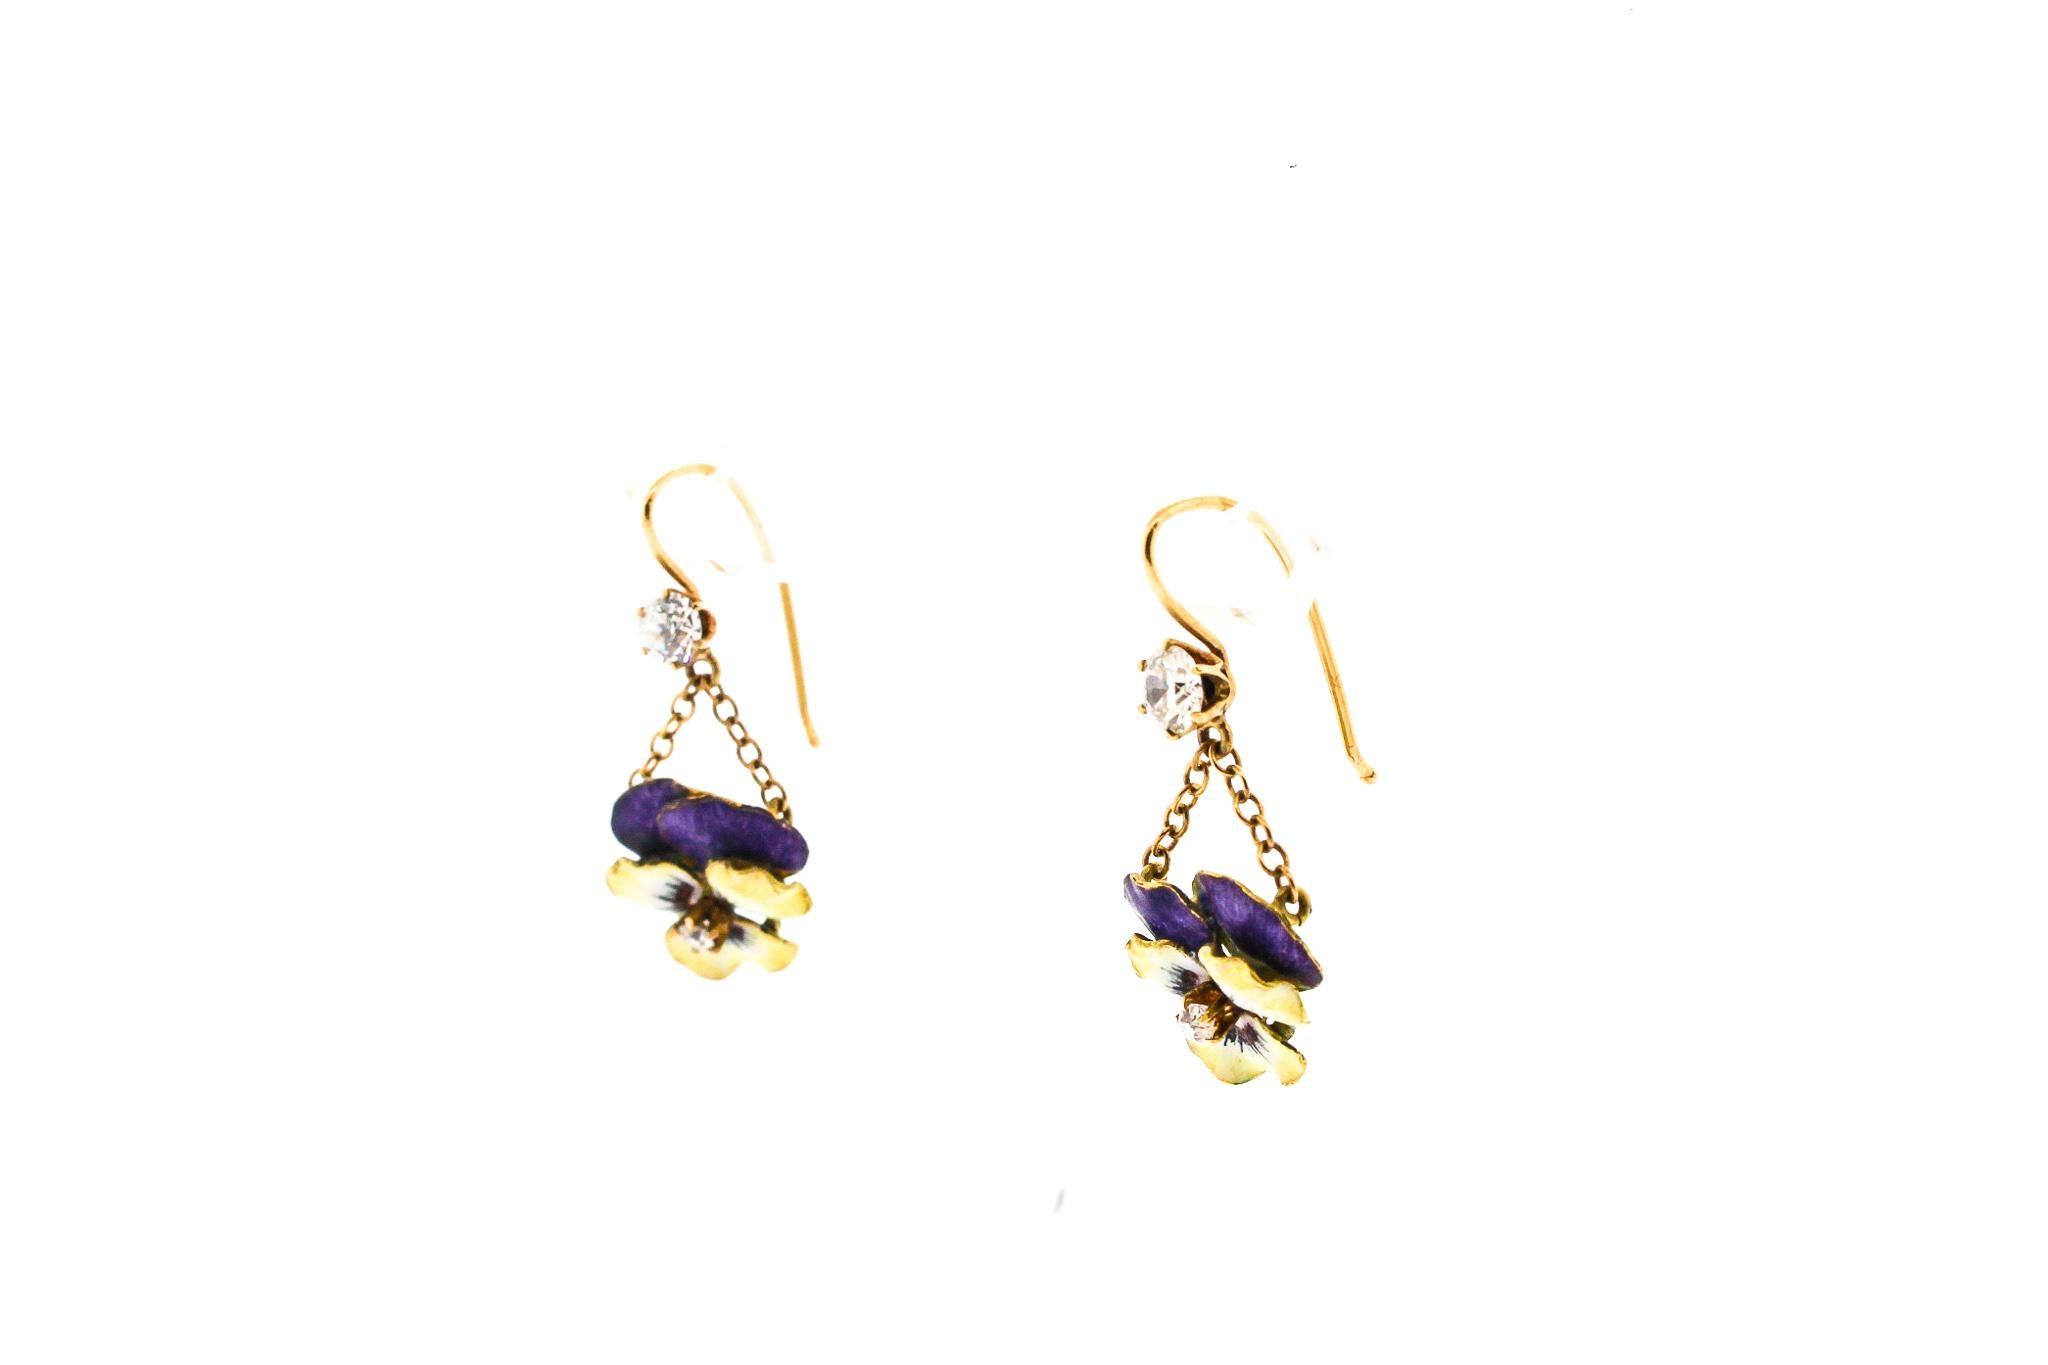 A pretty vintage pair of yellow and purple enamel 18k yellow gold pansy flowers made into a hanging earring. The flower itself dates to about 1950 and were likely stick pins originally. The pair currently hang from chain and are suspended from two